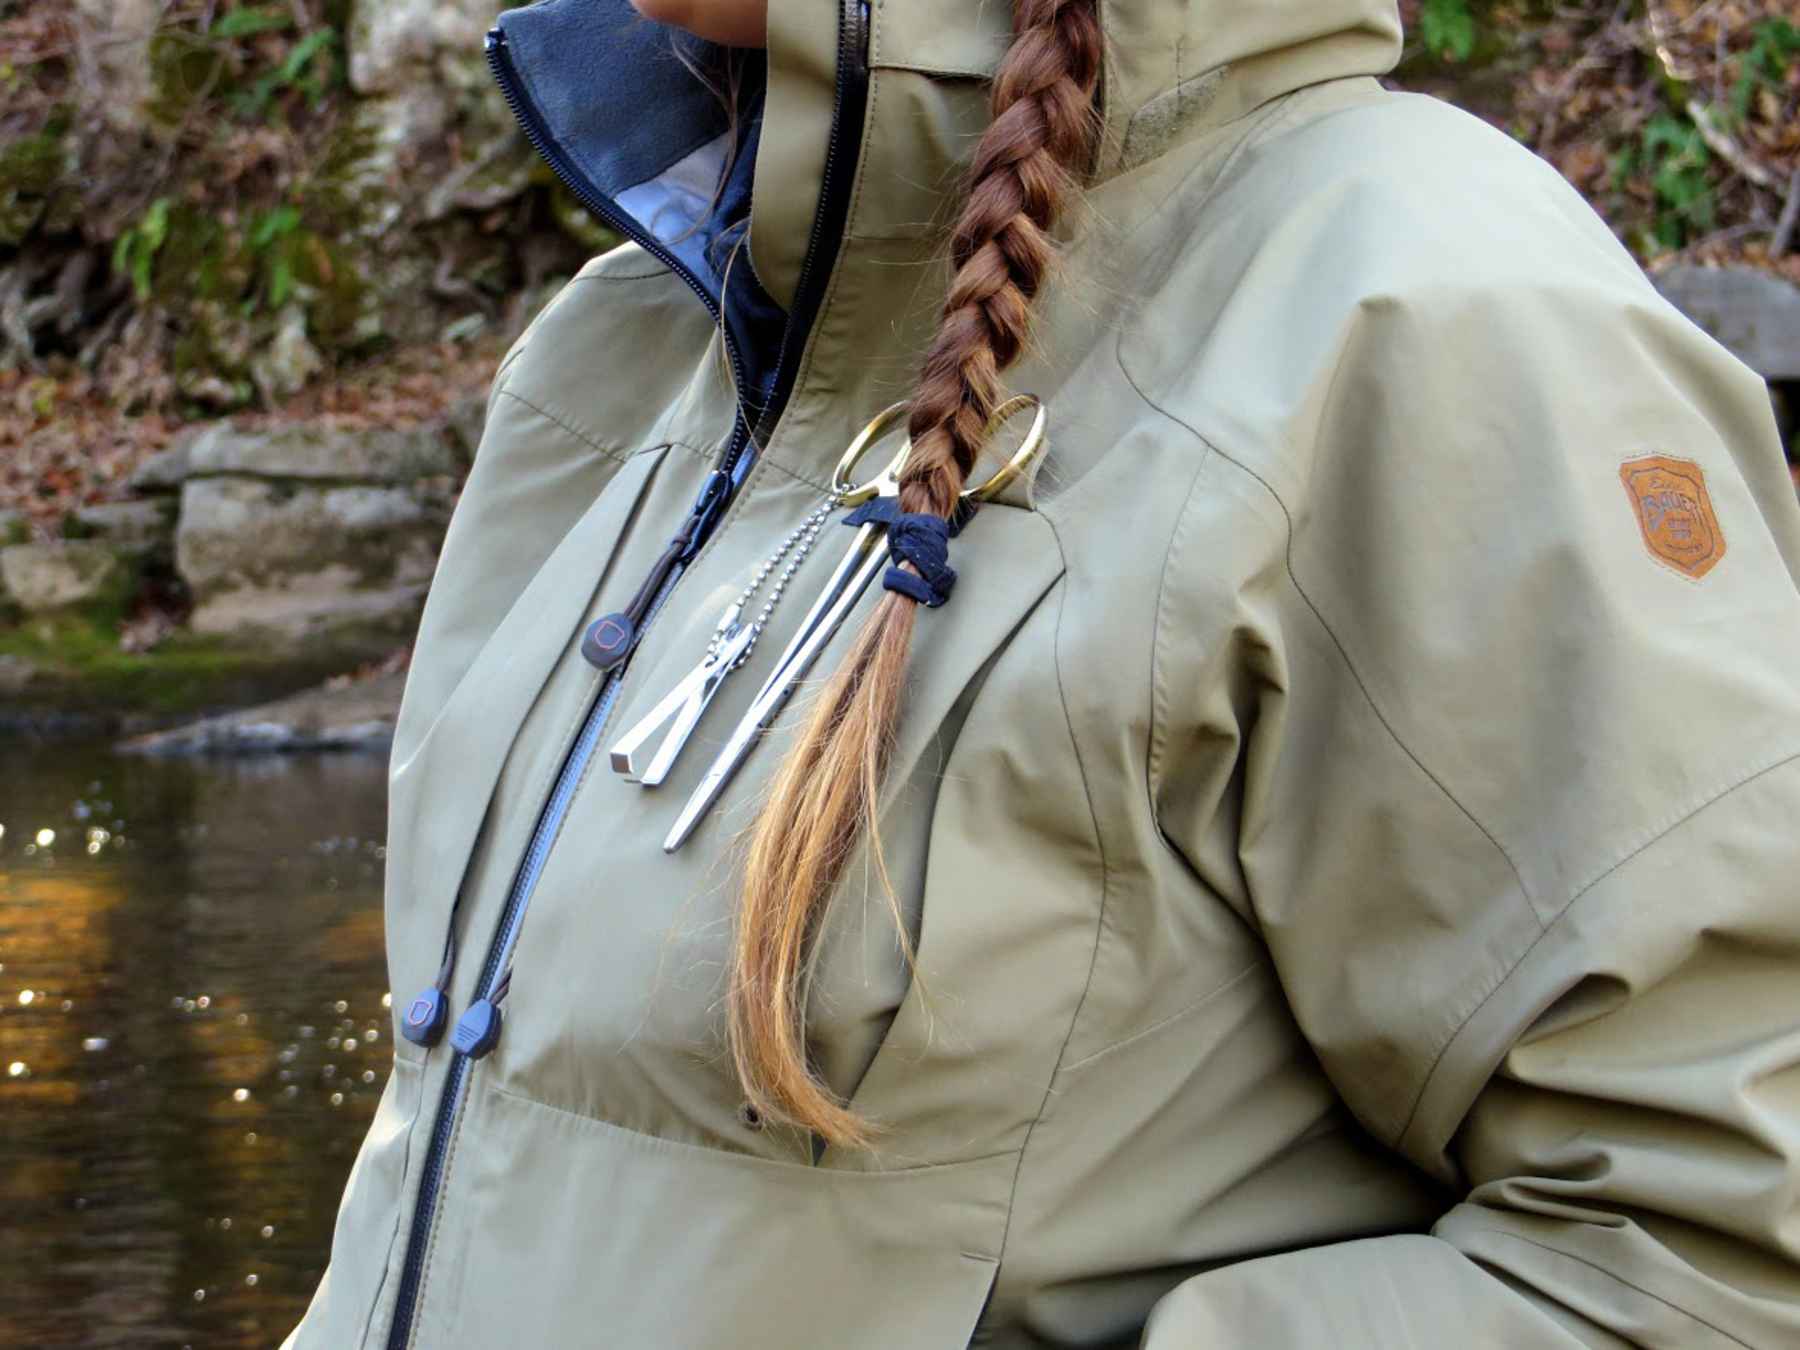 Orvis Outdoor Clothing for Women - With Our Best - Denver Lifestyle Blog